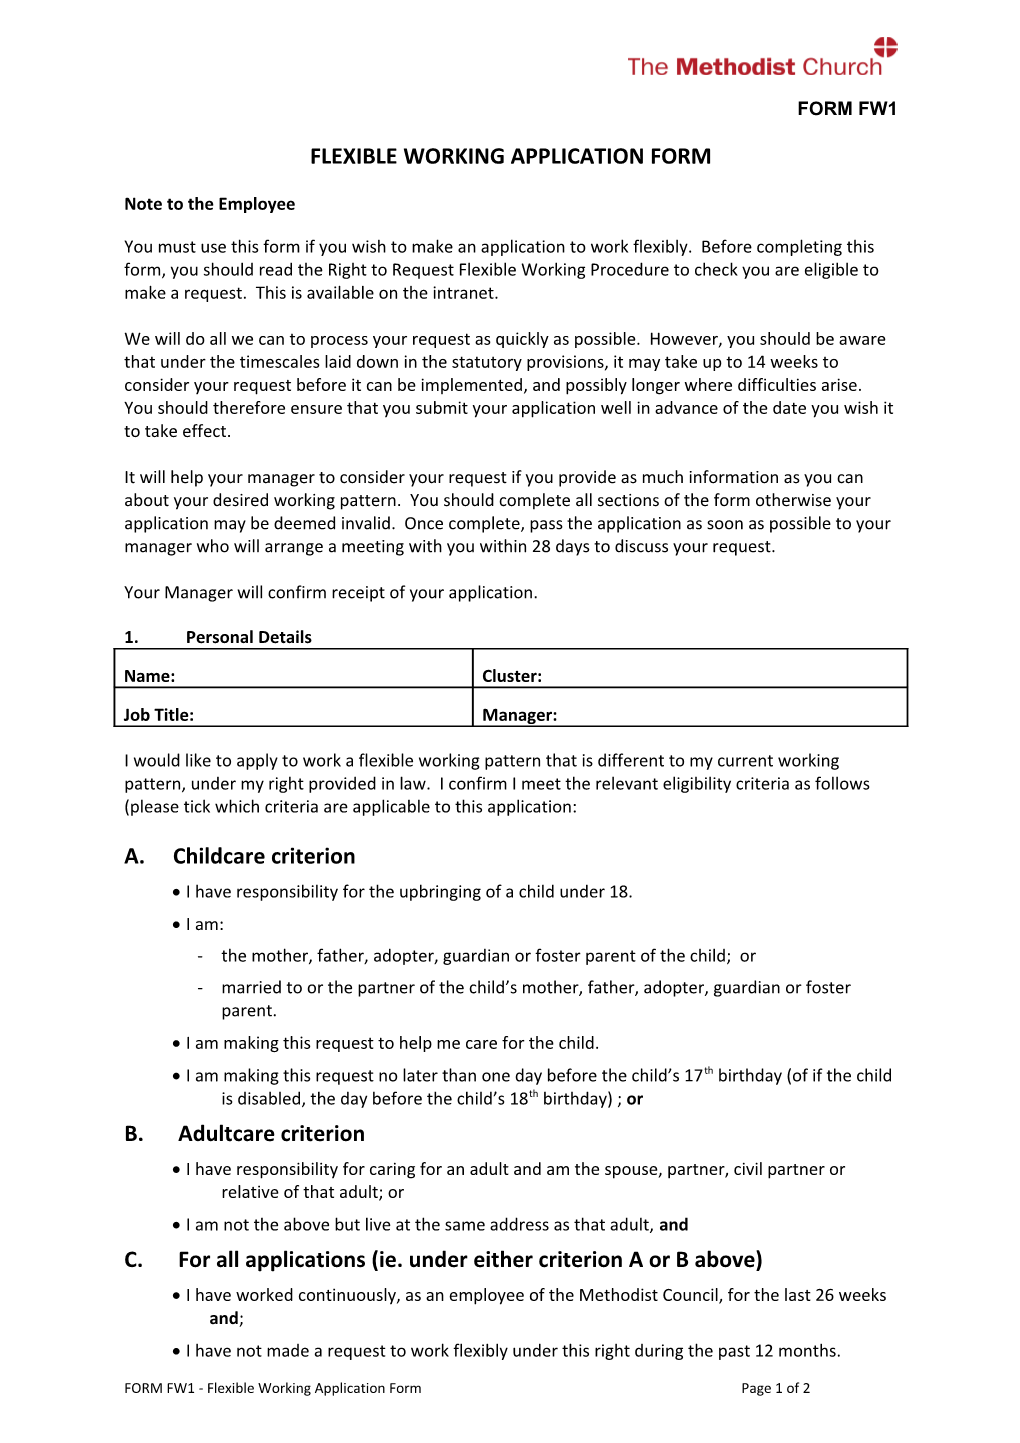 Flexible Working Application Form